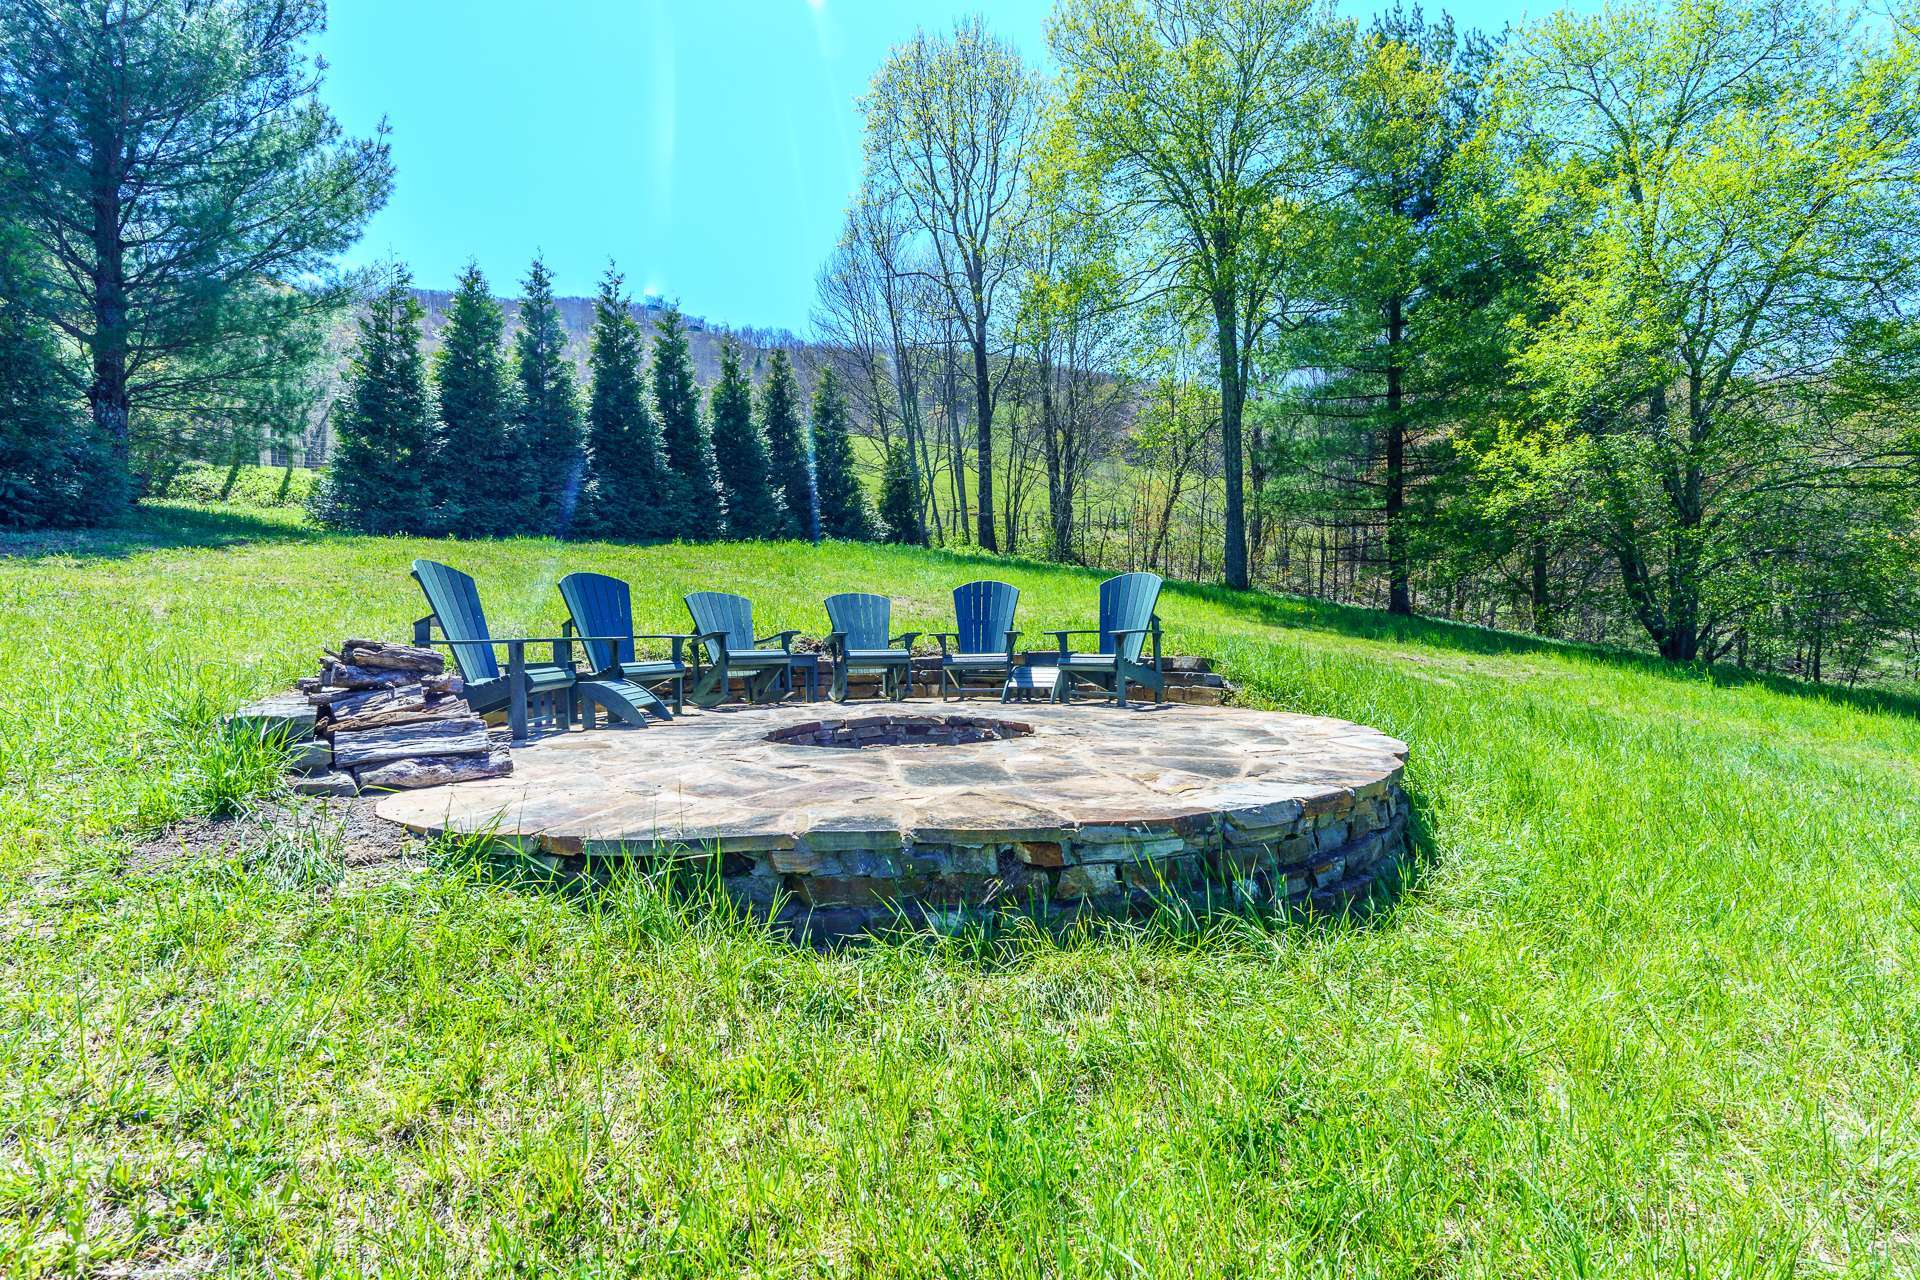 Enjoy star gazing and roasting marshmallows in the fire pit at this cleared knoll with long-range mountain views.